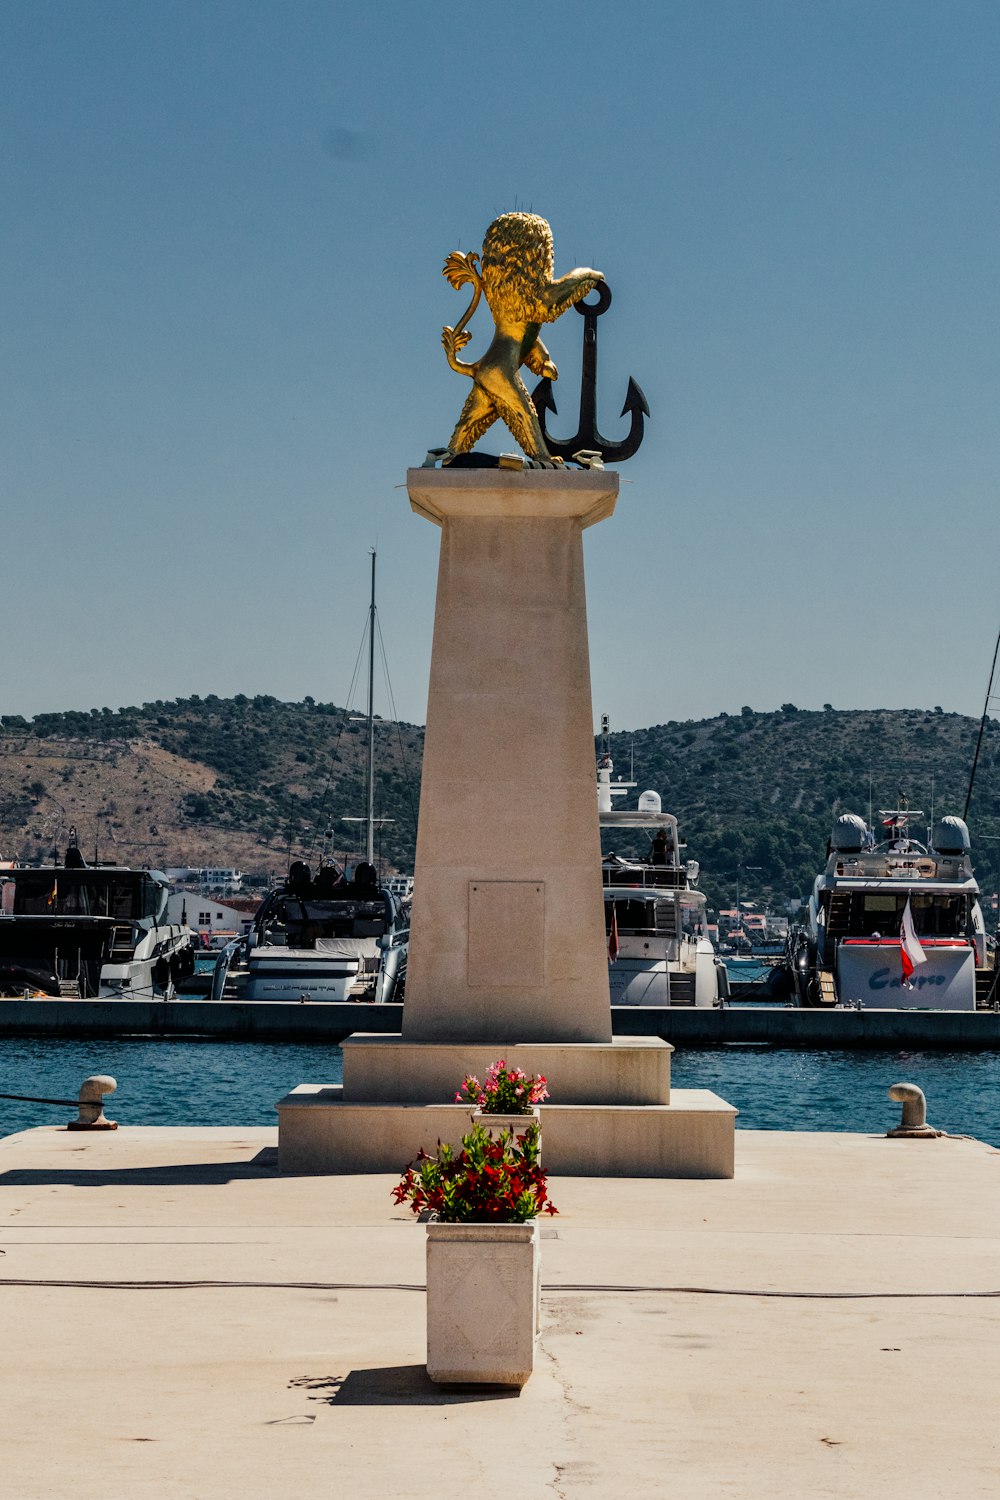 a statue of a lion on a pedestal in front of a harbor